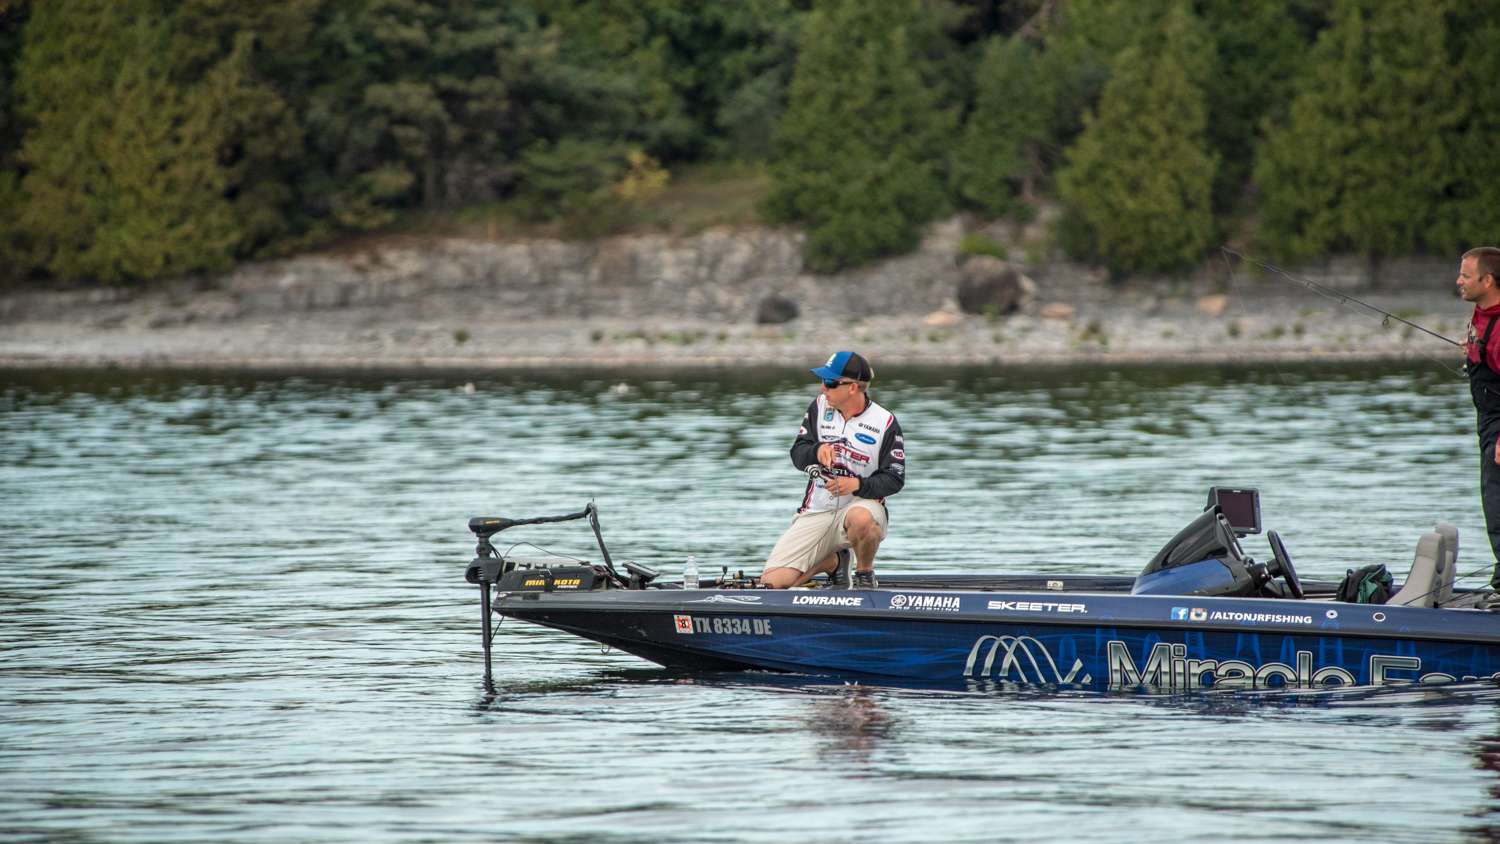 We first came across Alton Jones, Jr., who needs to have a strong day to move up in the overall points standings and hopefully qualify for the 2017 Bassmaster Elite Series.